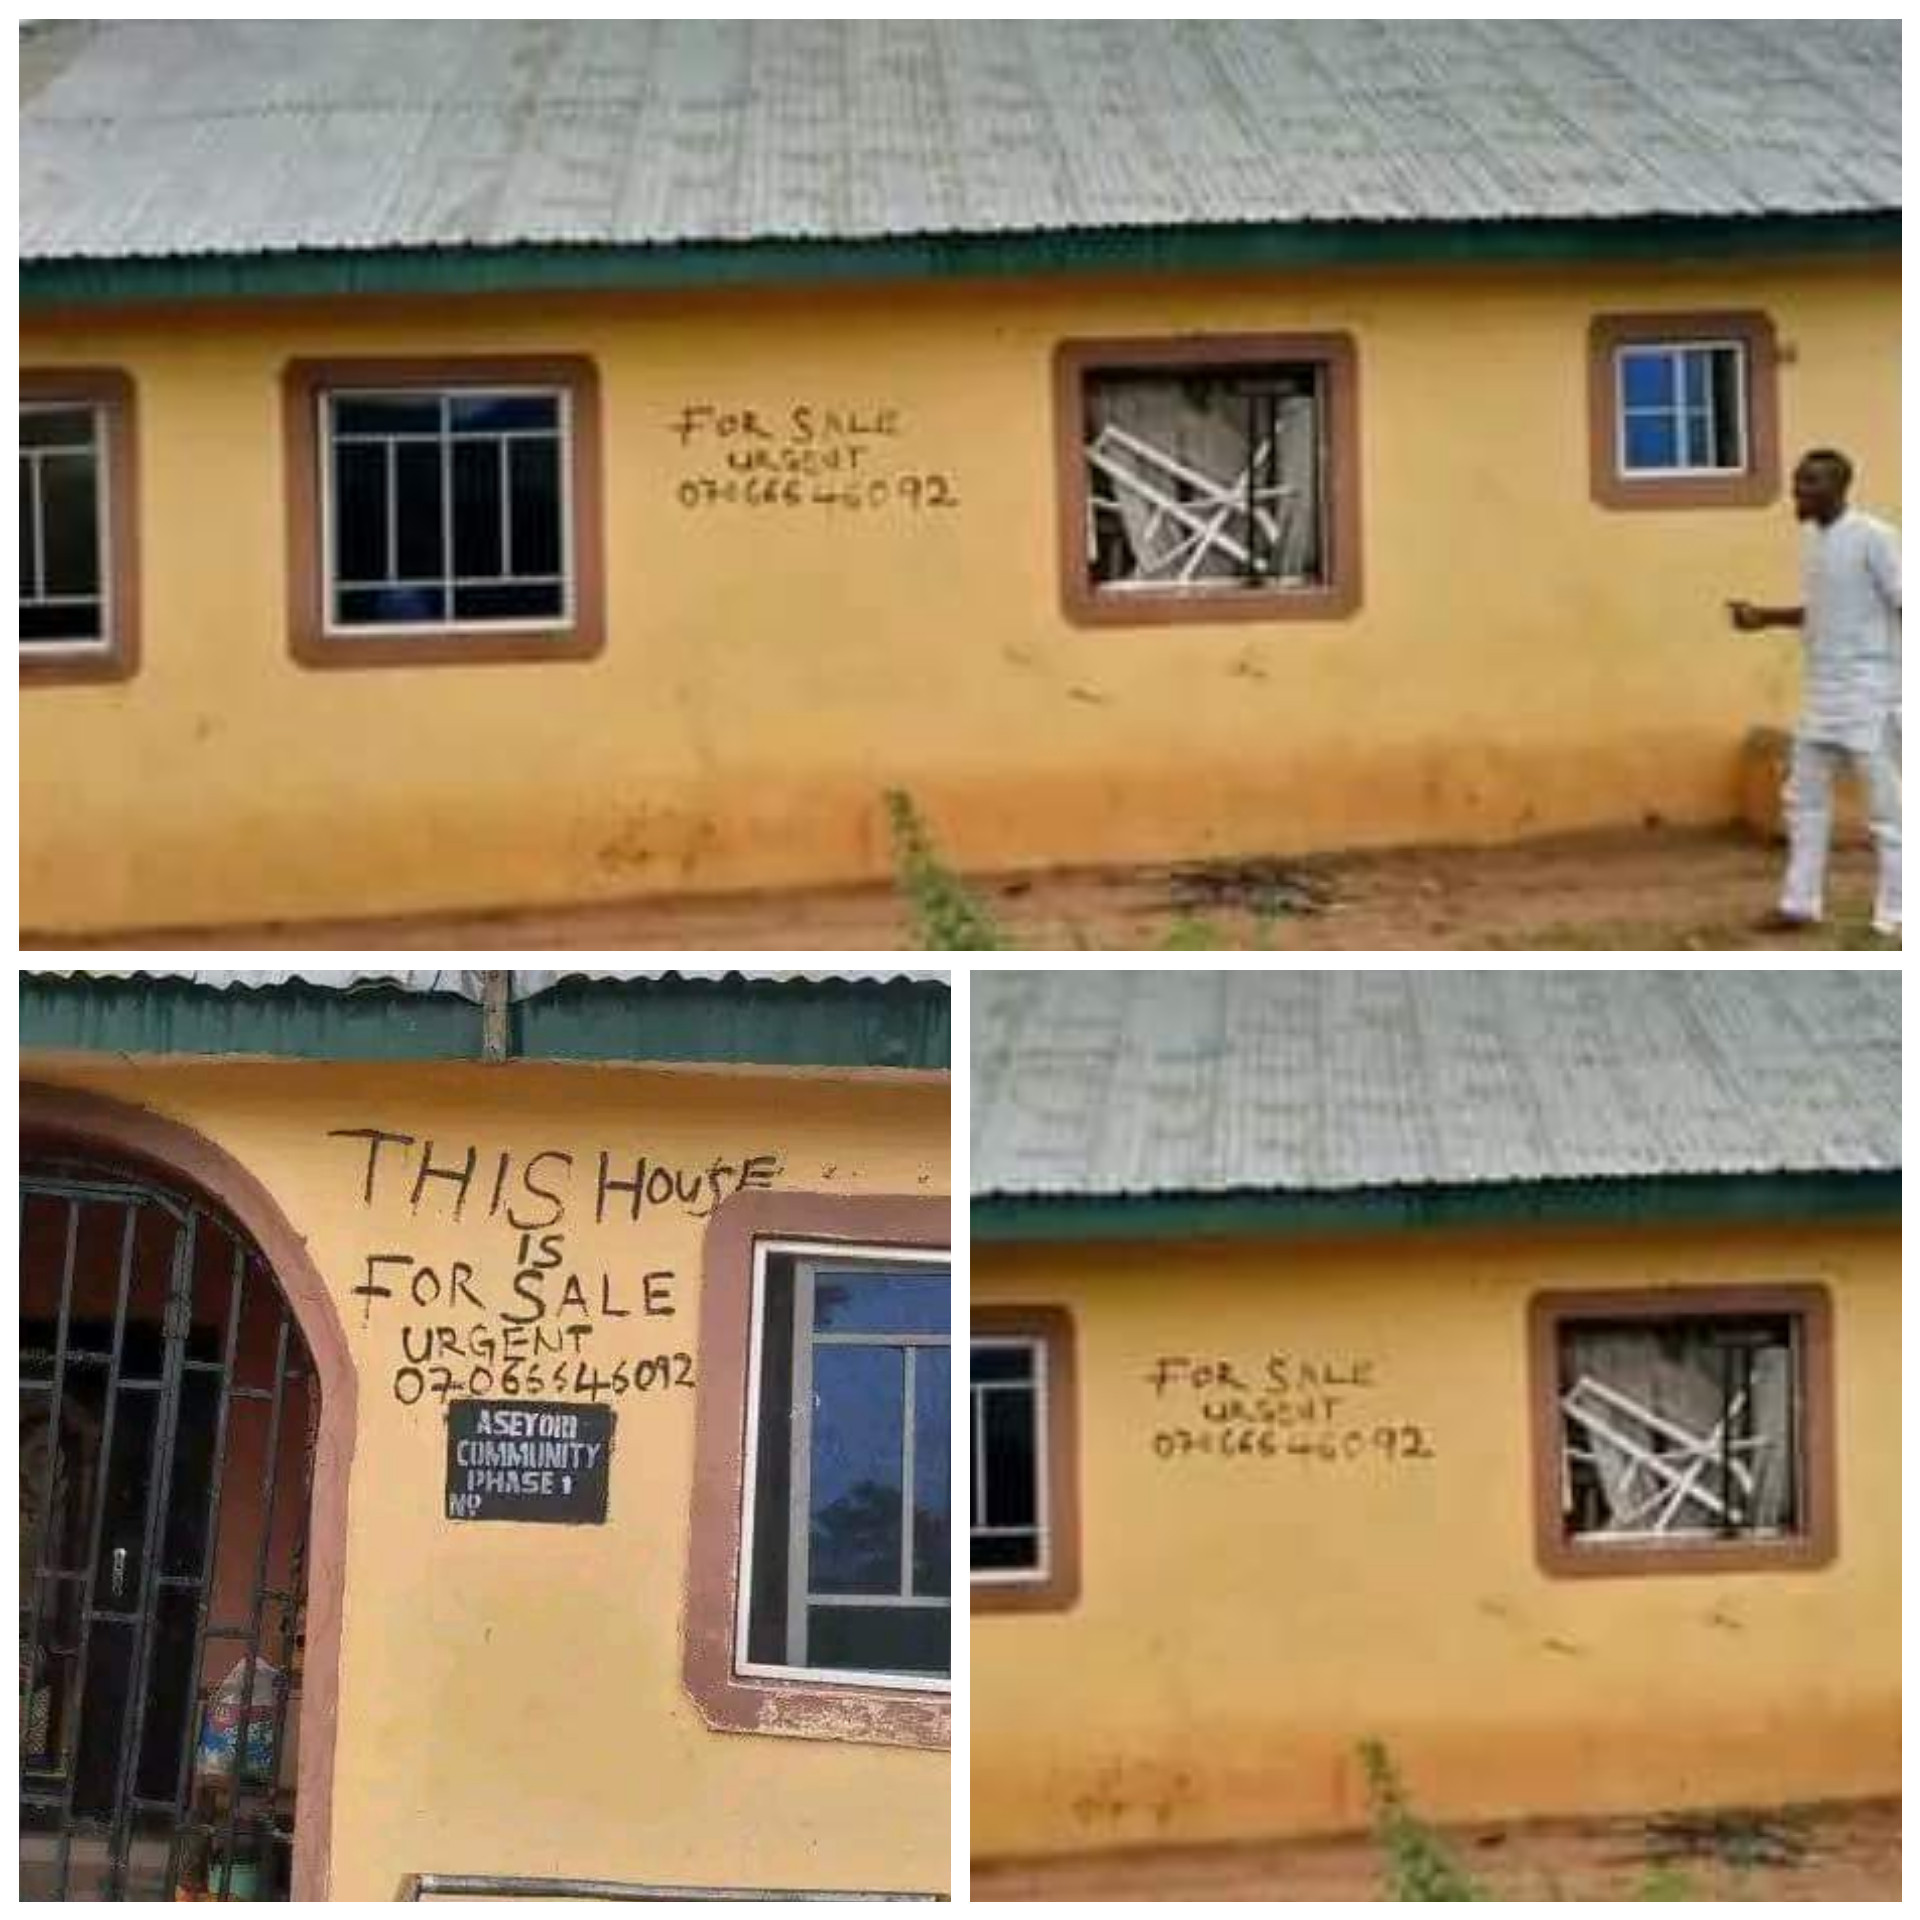 Father of two kidnapped children sells his car and puts house up for sale to raise N8m demanded as ransom in Kwara